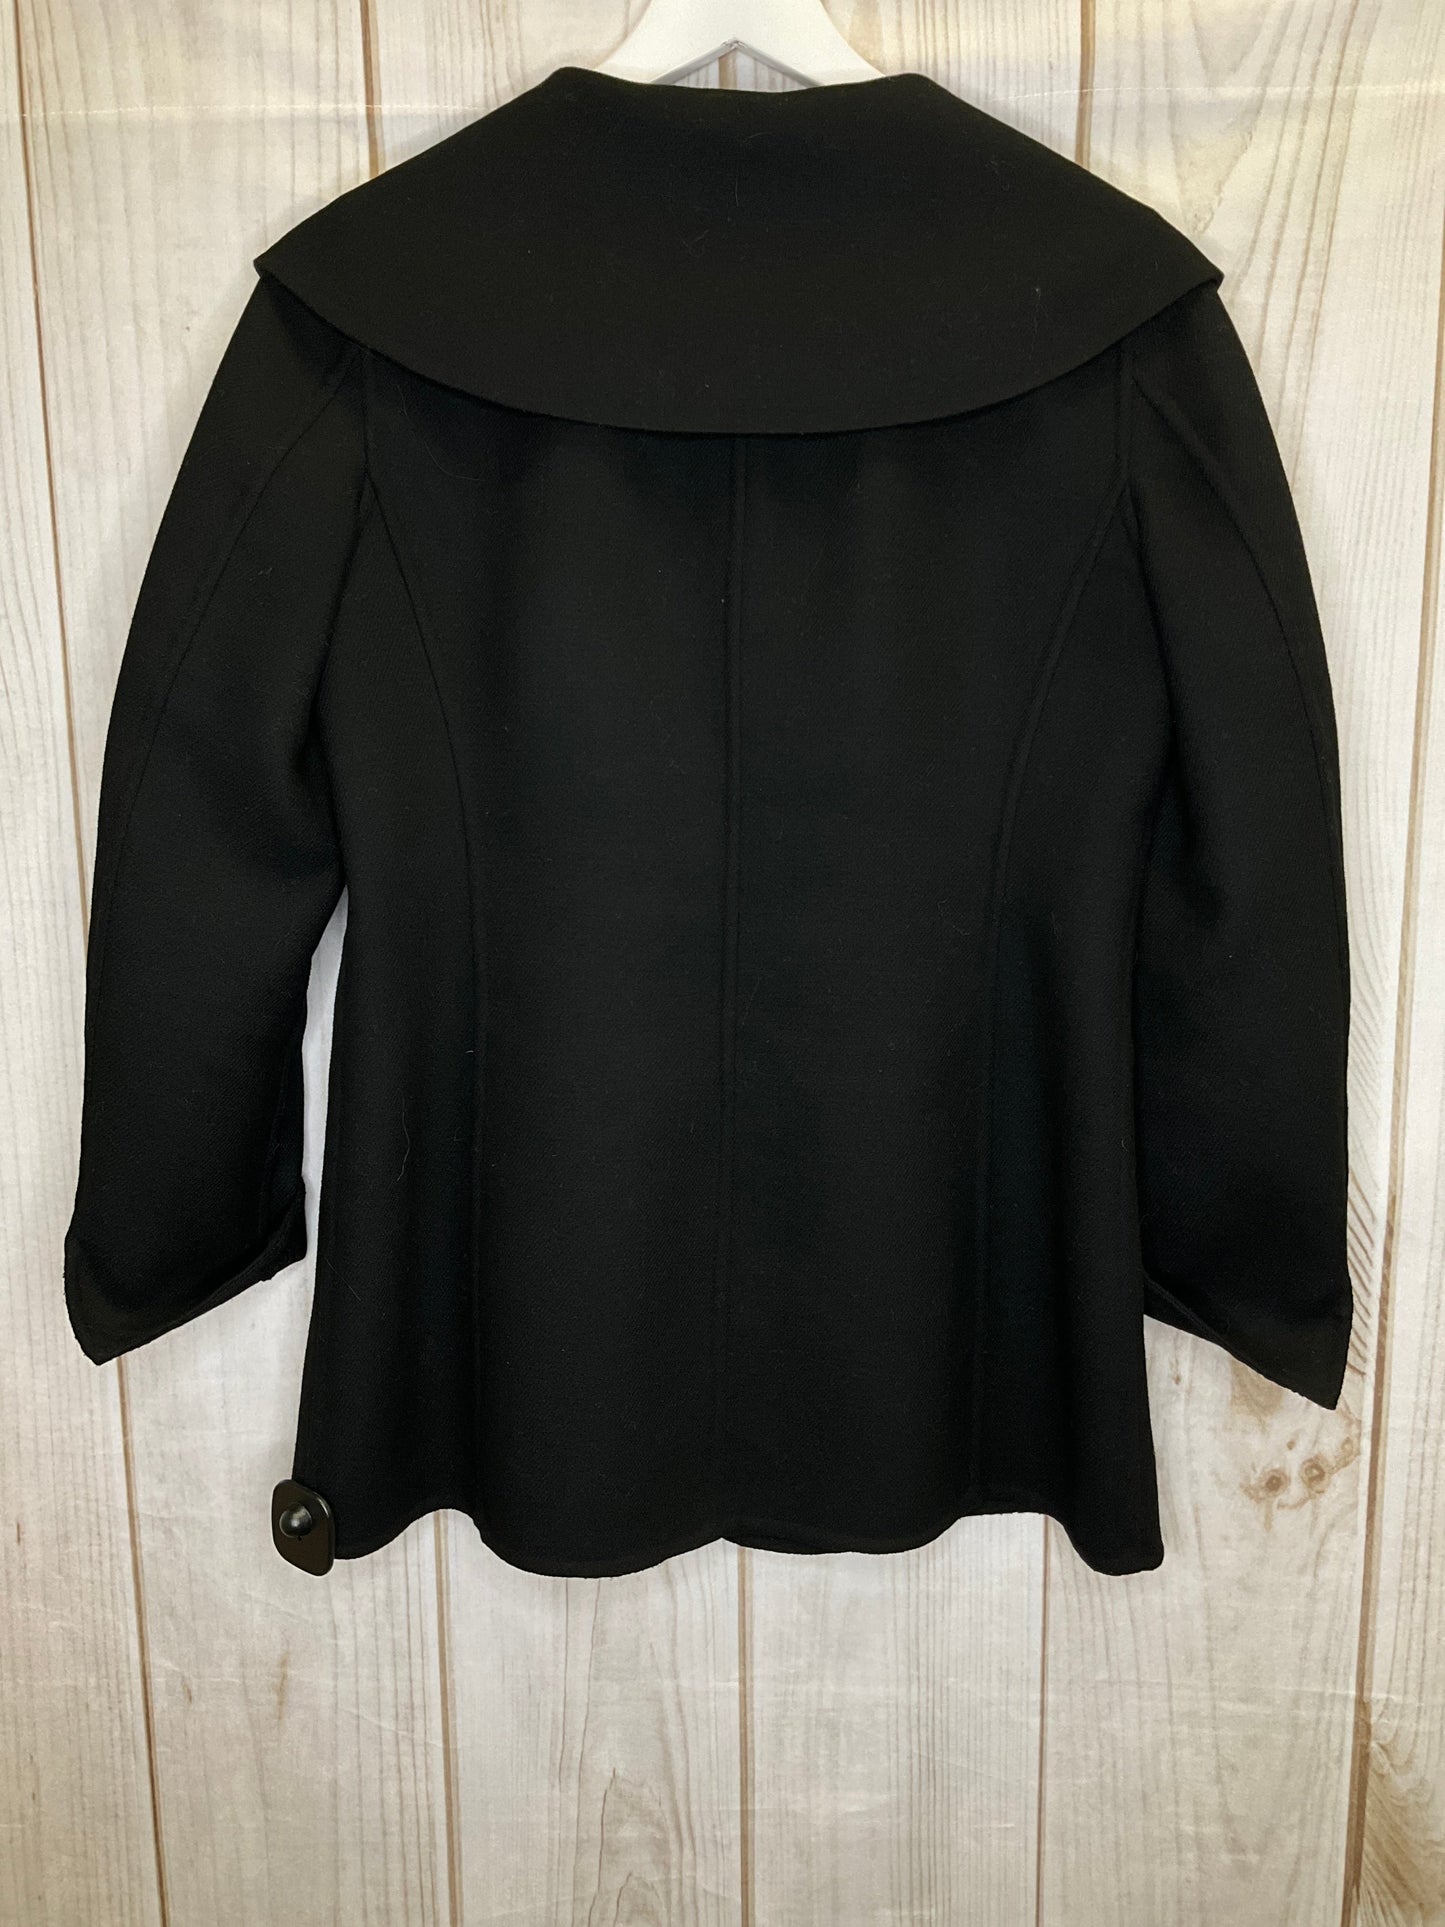 Coat Peacoat By Talbots  Size: Petite   Small